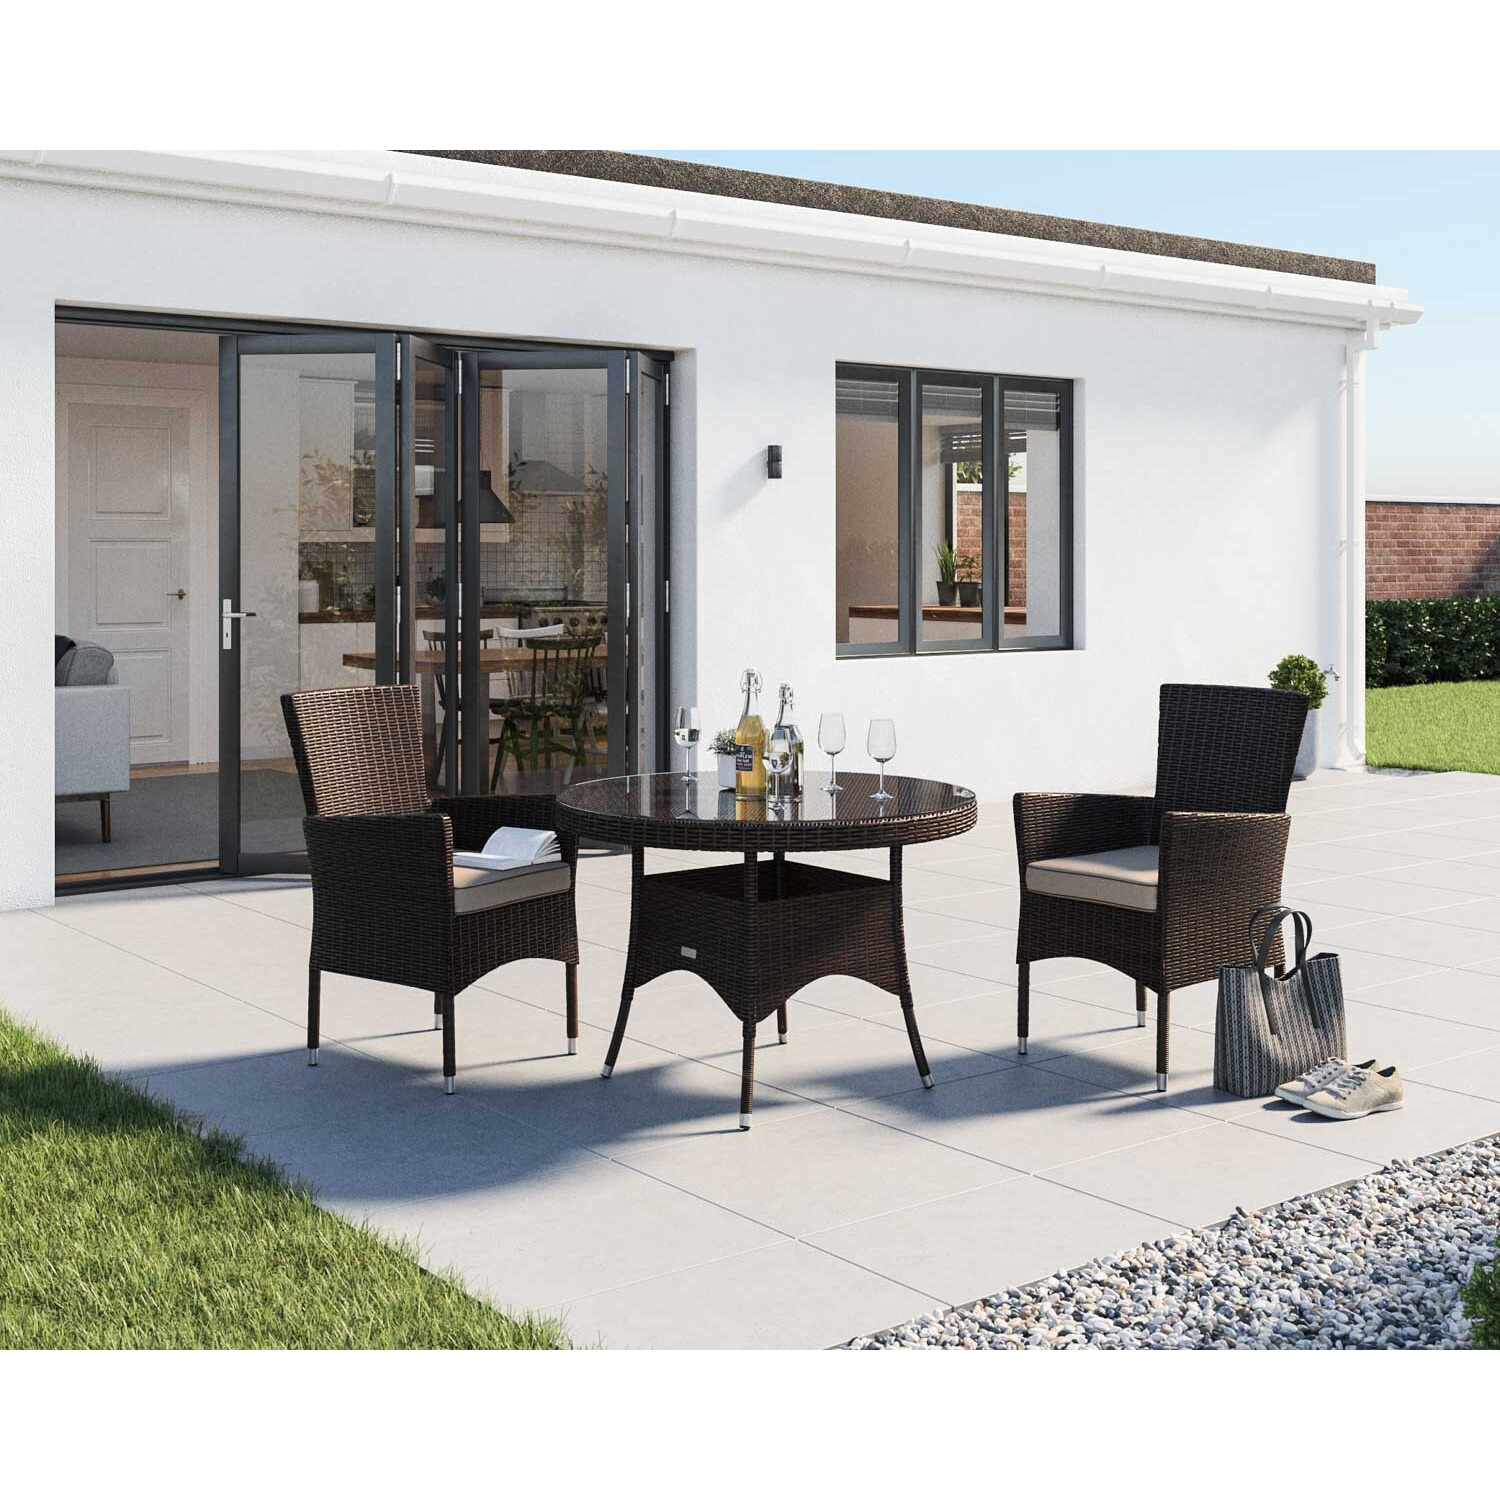 2 Seater Rattan Garden Dining Set With Small Round Dining Table in Brown - Cambridge - Rattan Direct